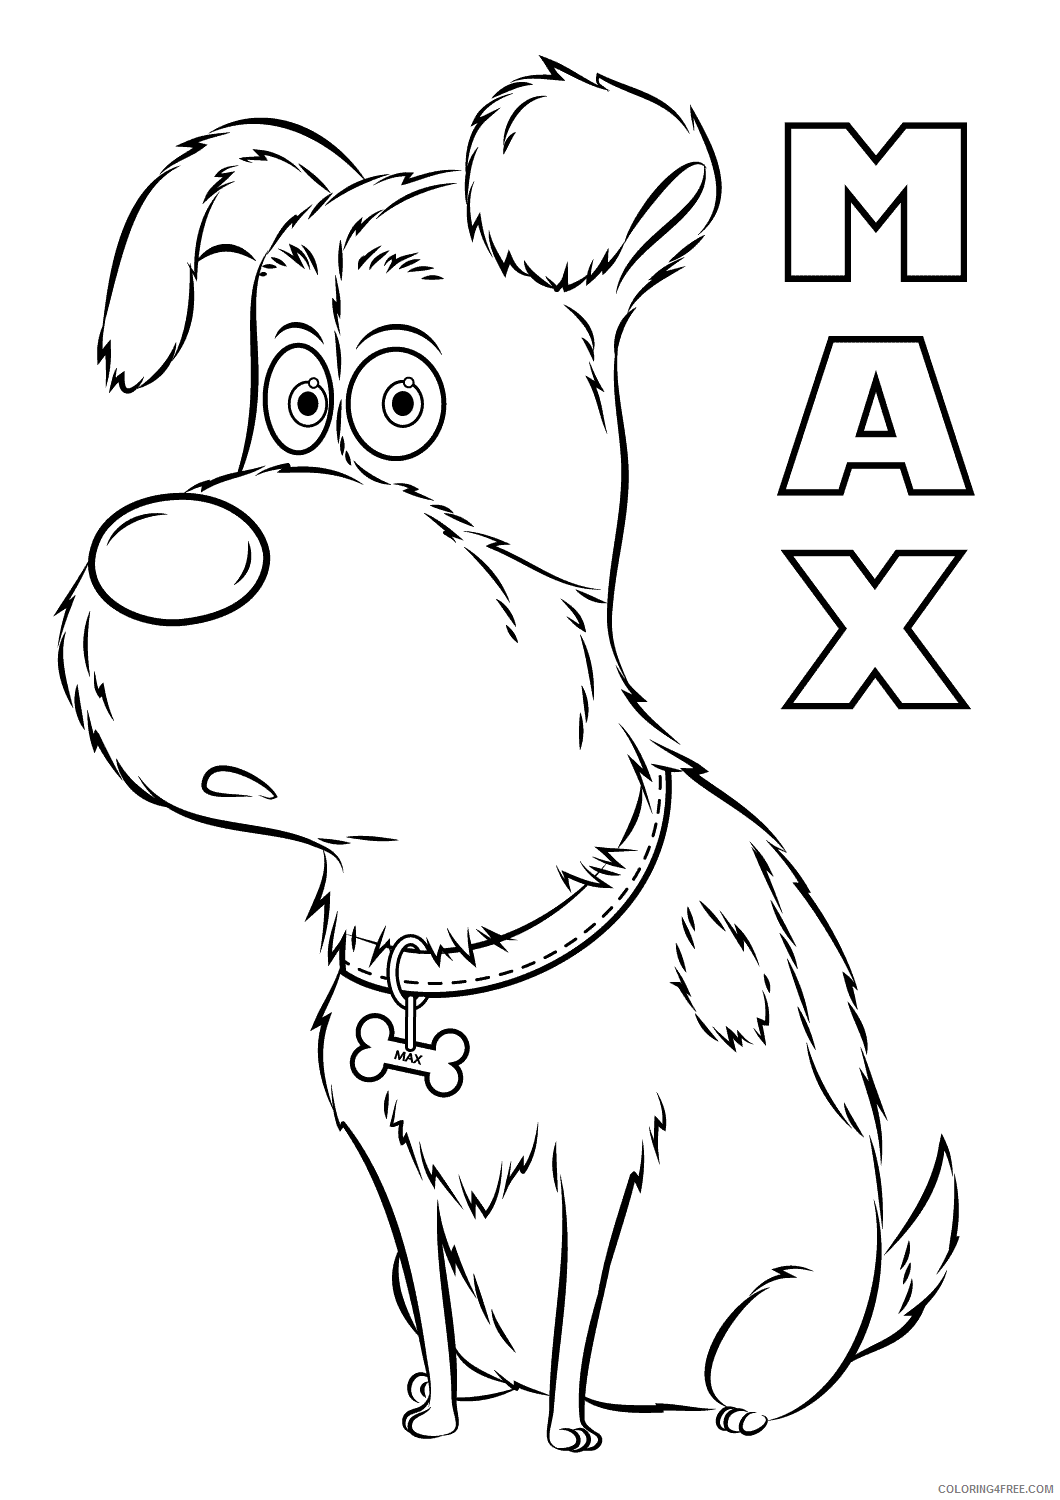 The Secret Life of Pets Coloring Pages TV Film max Printable 2020 09480 Coloring4free